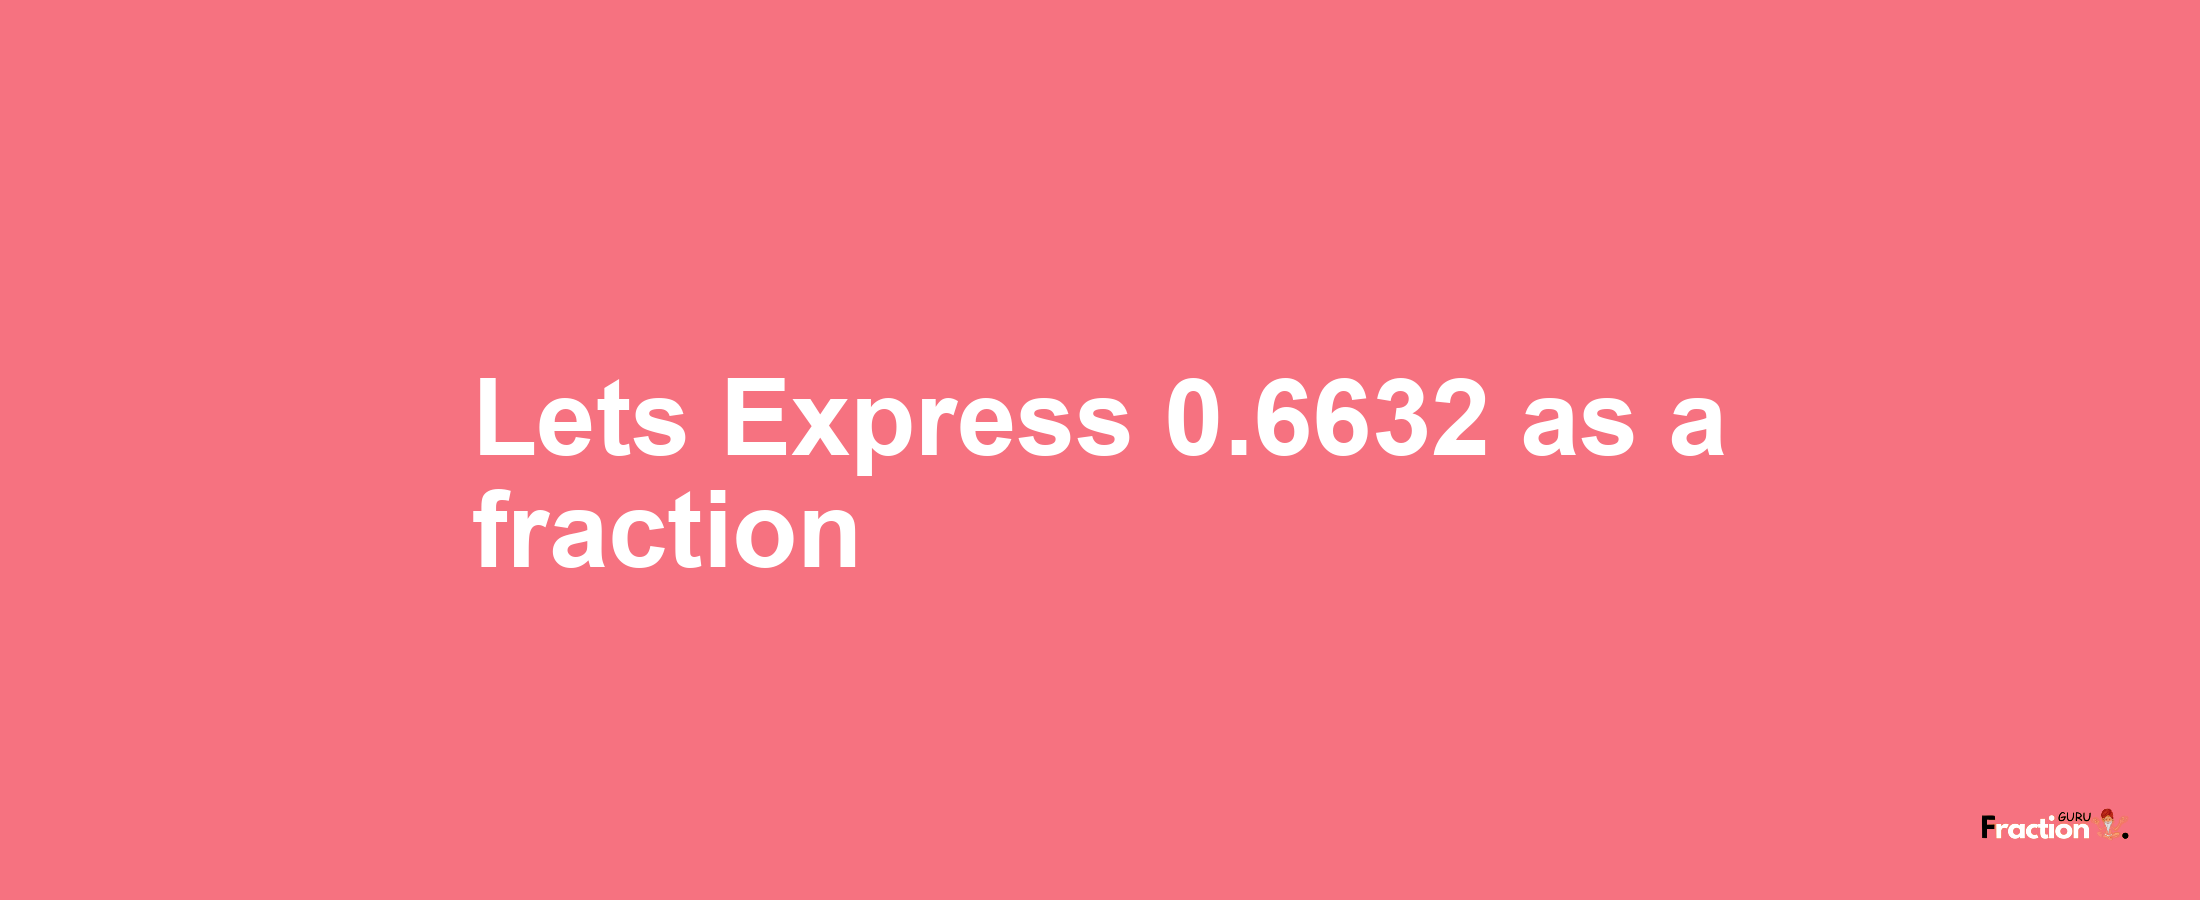 Lets Express 0.6632 as afraction